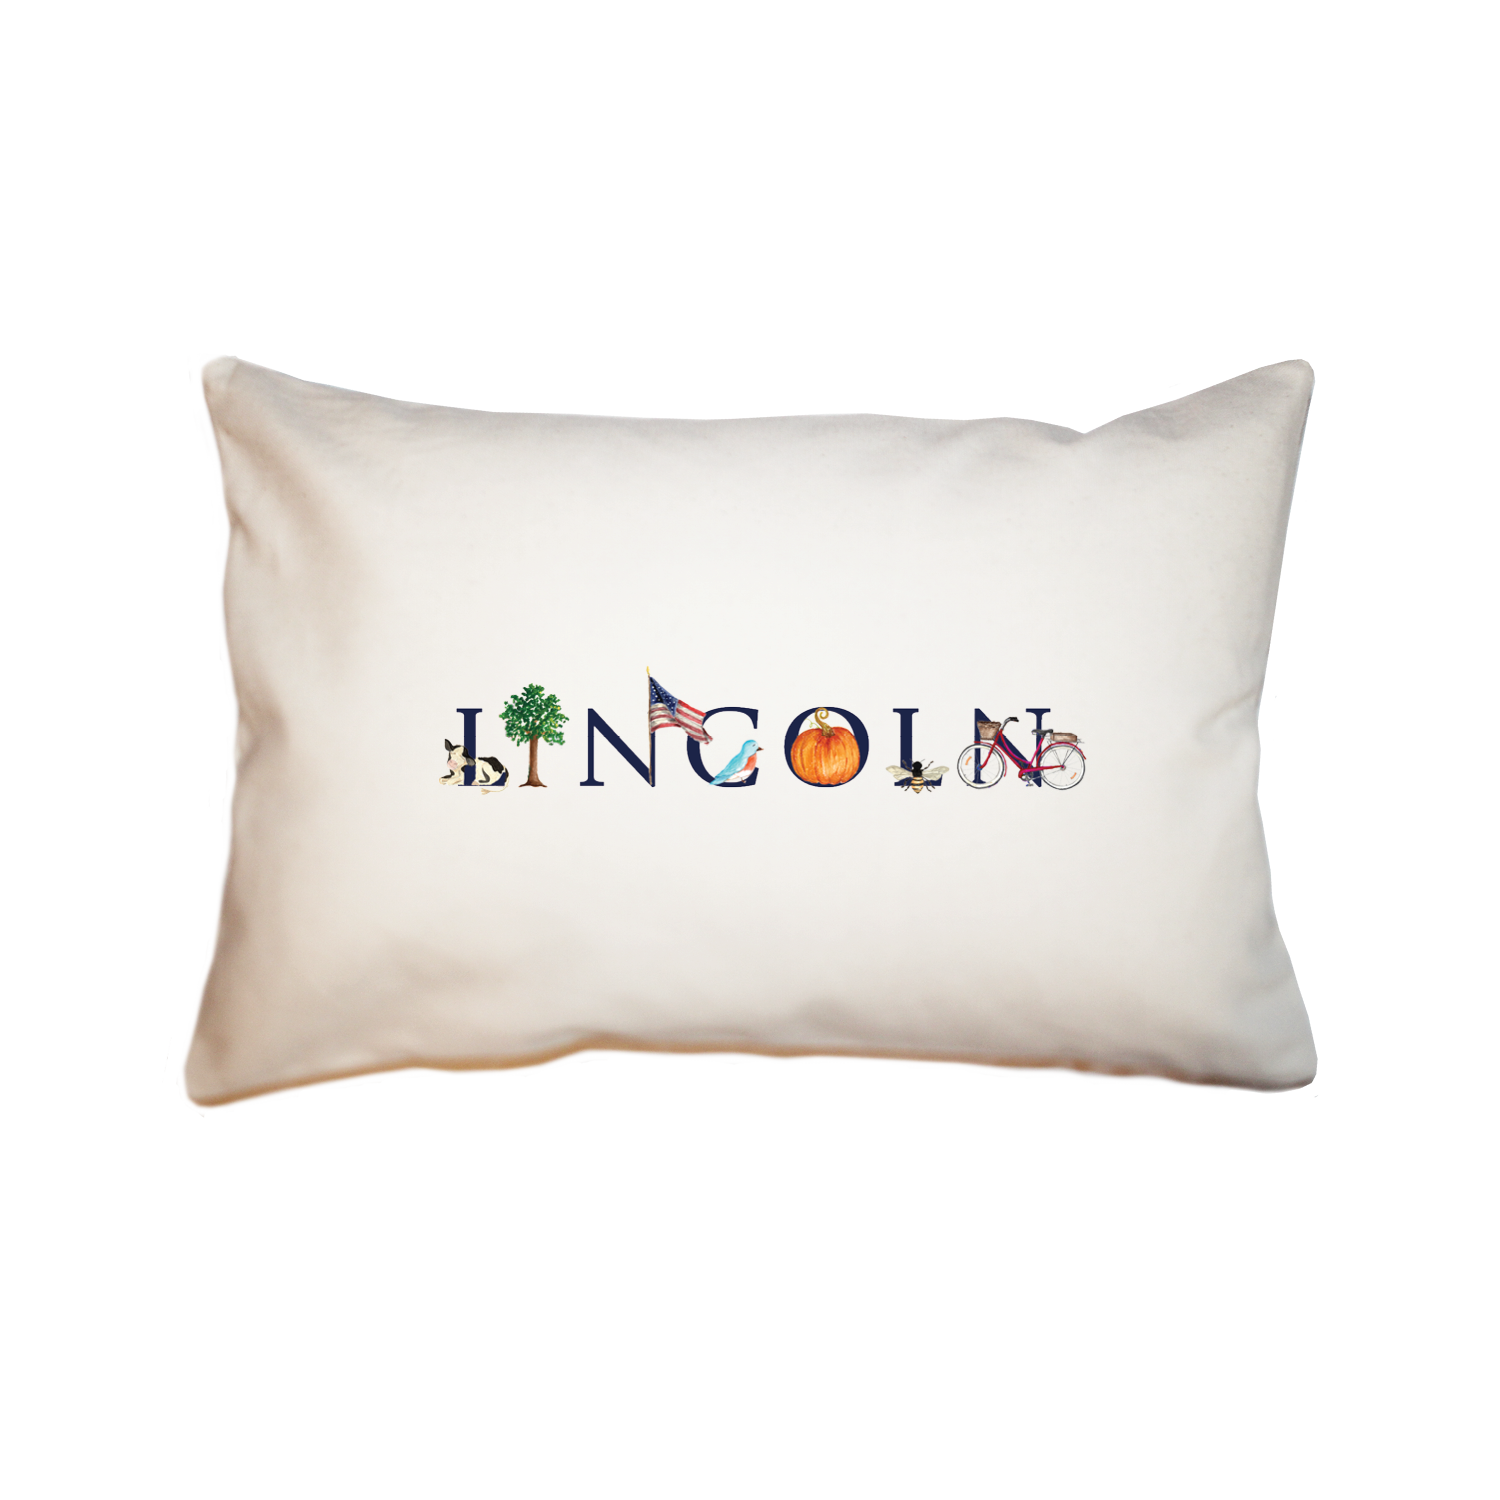 Lincoln large rectangle pillow